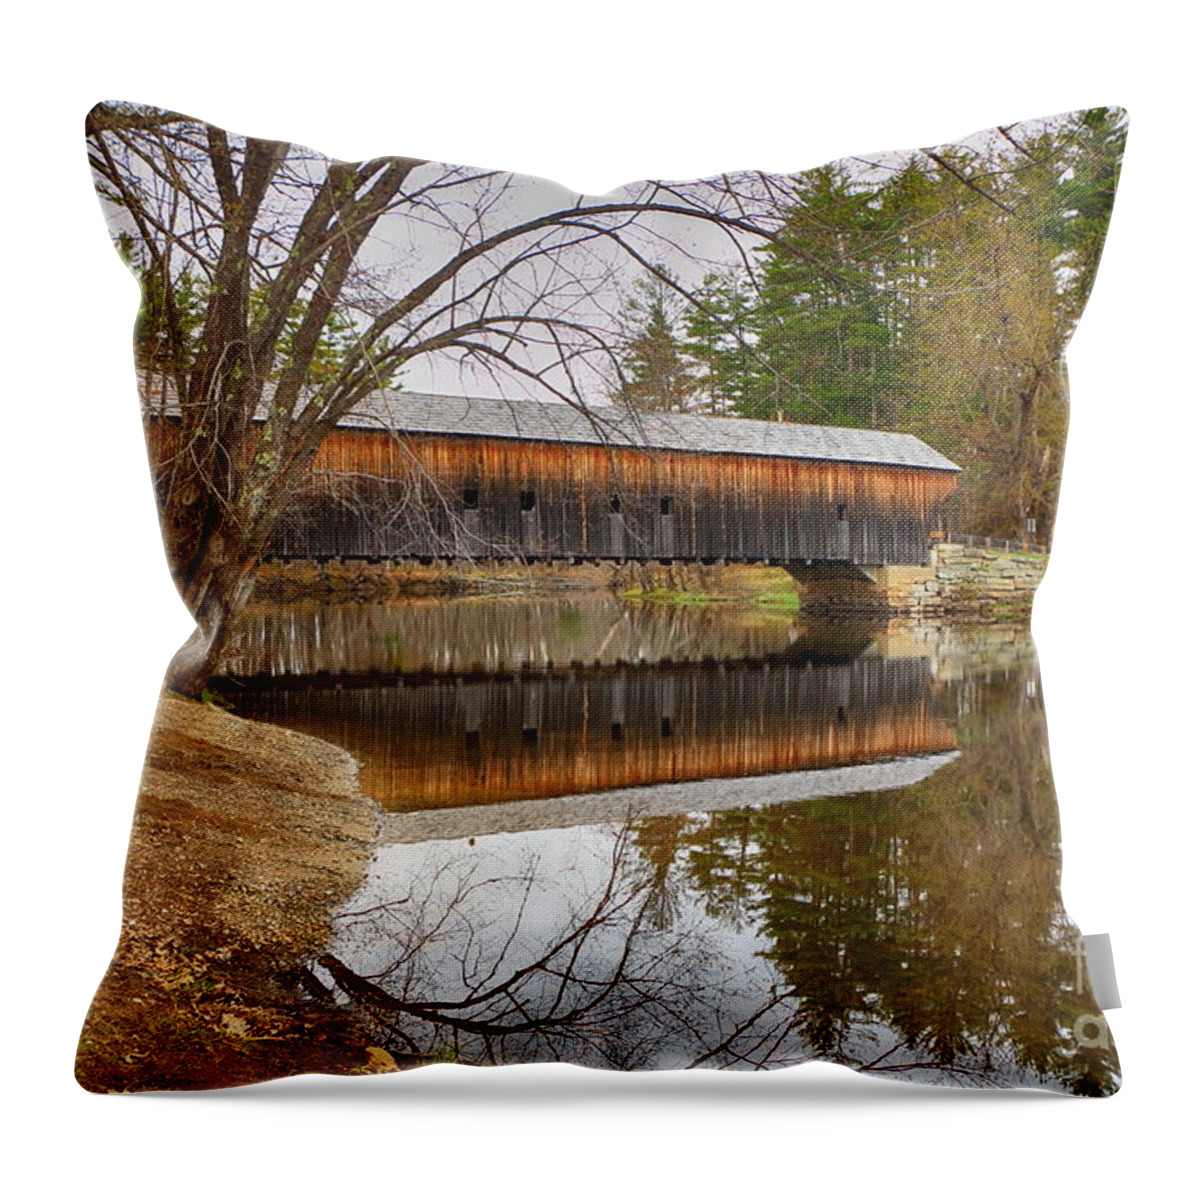 Branches Throw Pillow featuring the photograph Hemlock Bridge 1857 by Elizabeth Dow